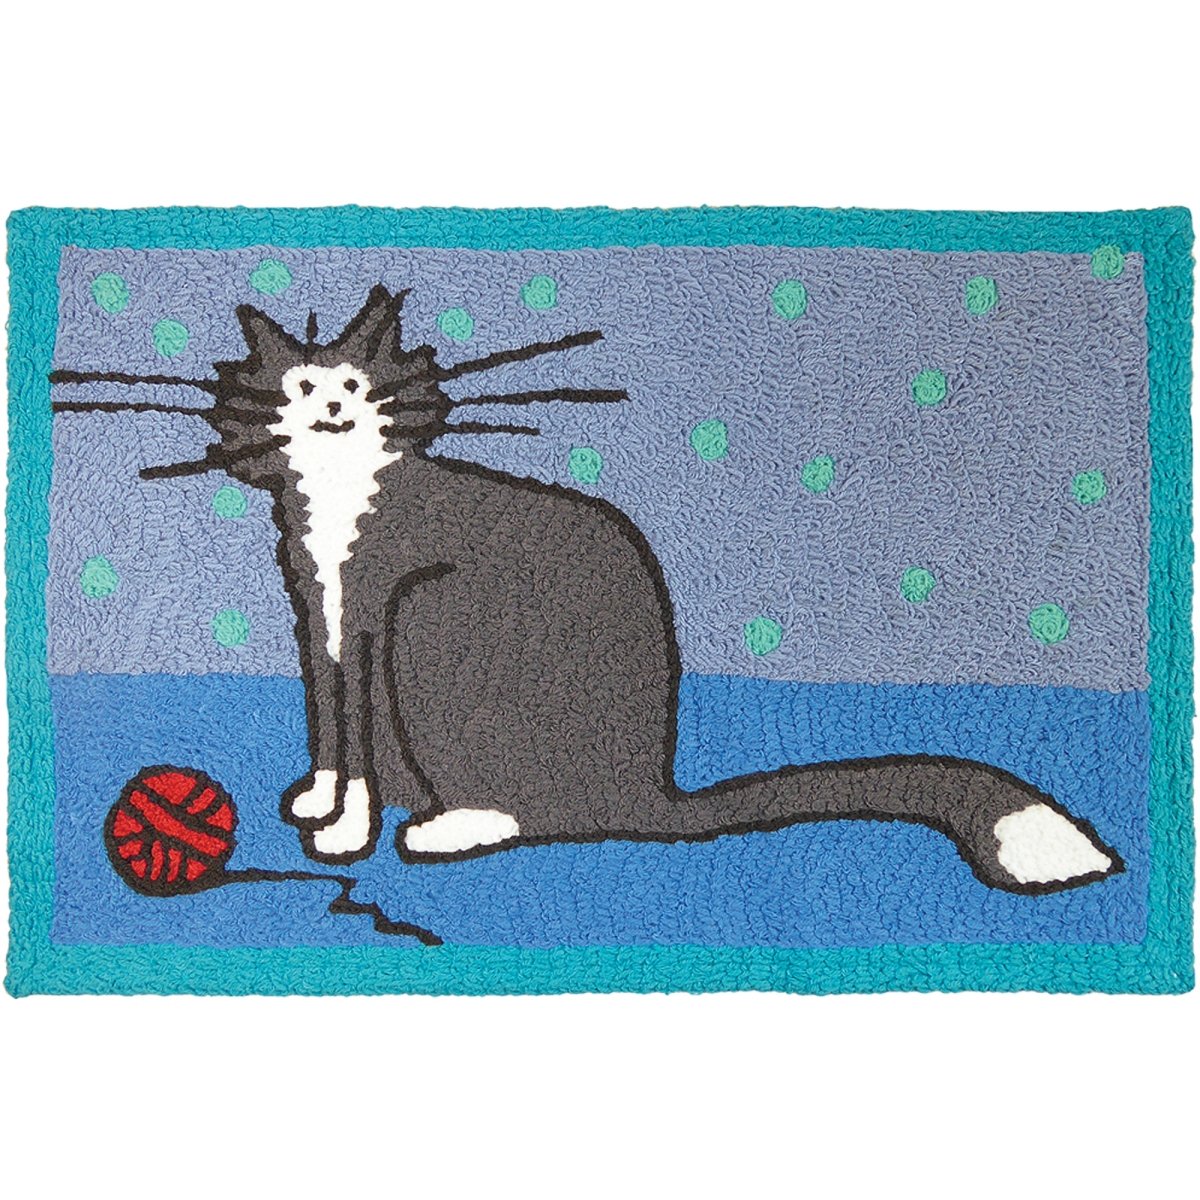 Jb-kr005 20 X 30 In. Its A Kitty Thing Rug